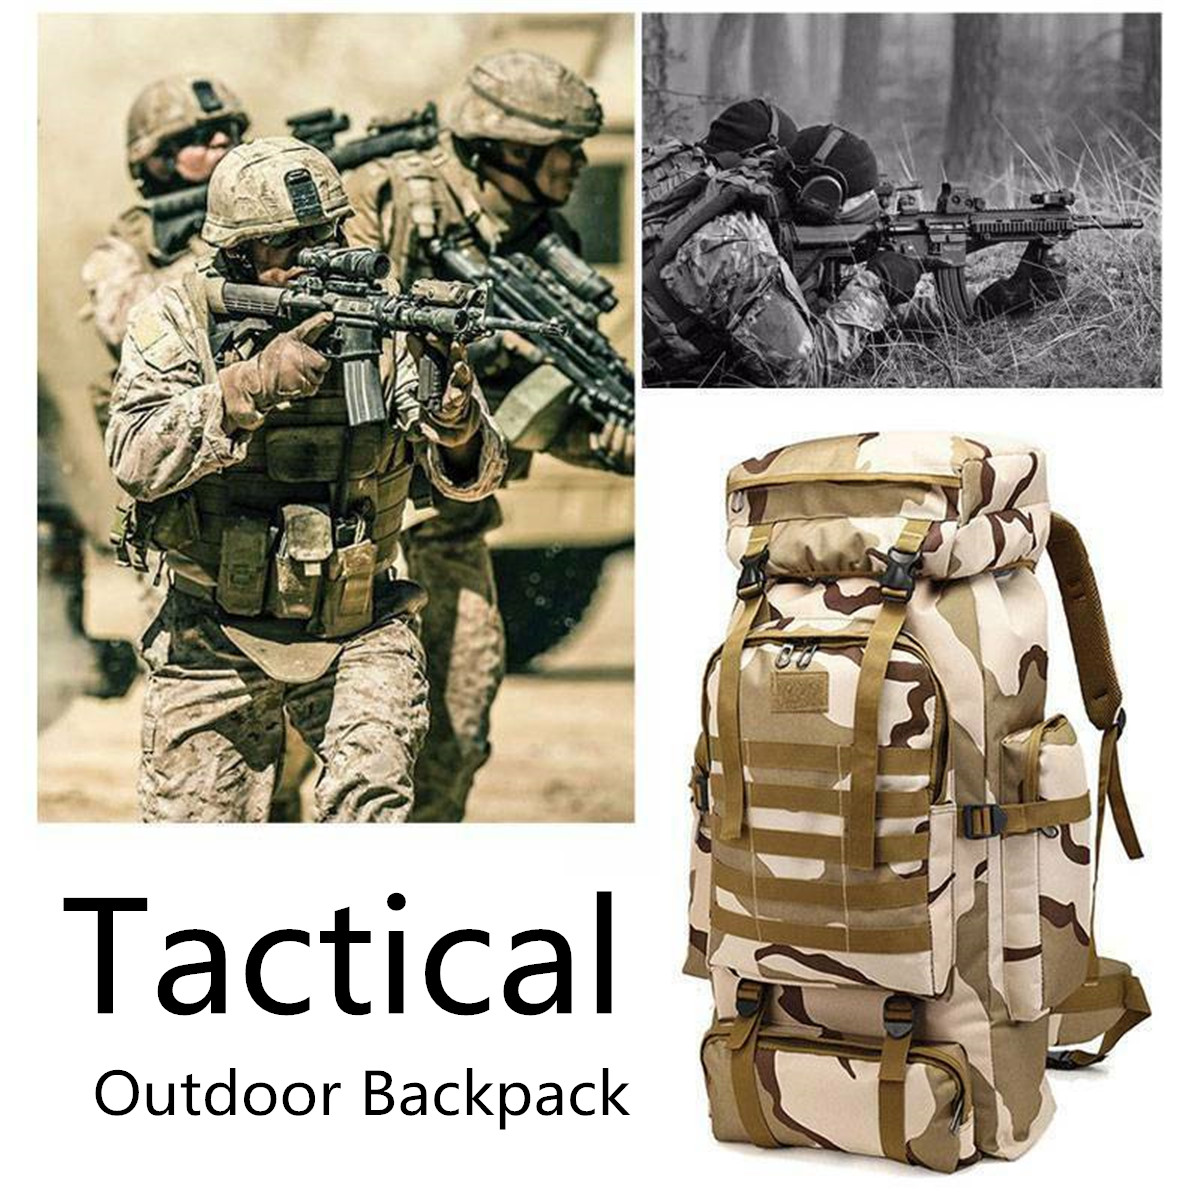 80L-Molle-Tactical-Bag-Outdoor-Traveling-Camping-Hiking-Military-Rucksacks-Backpack-Camouflage-Bag-1556947-1